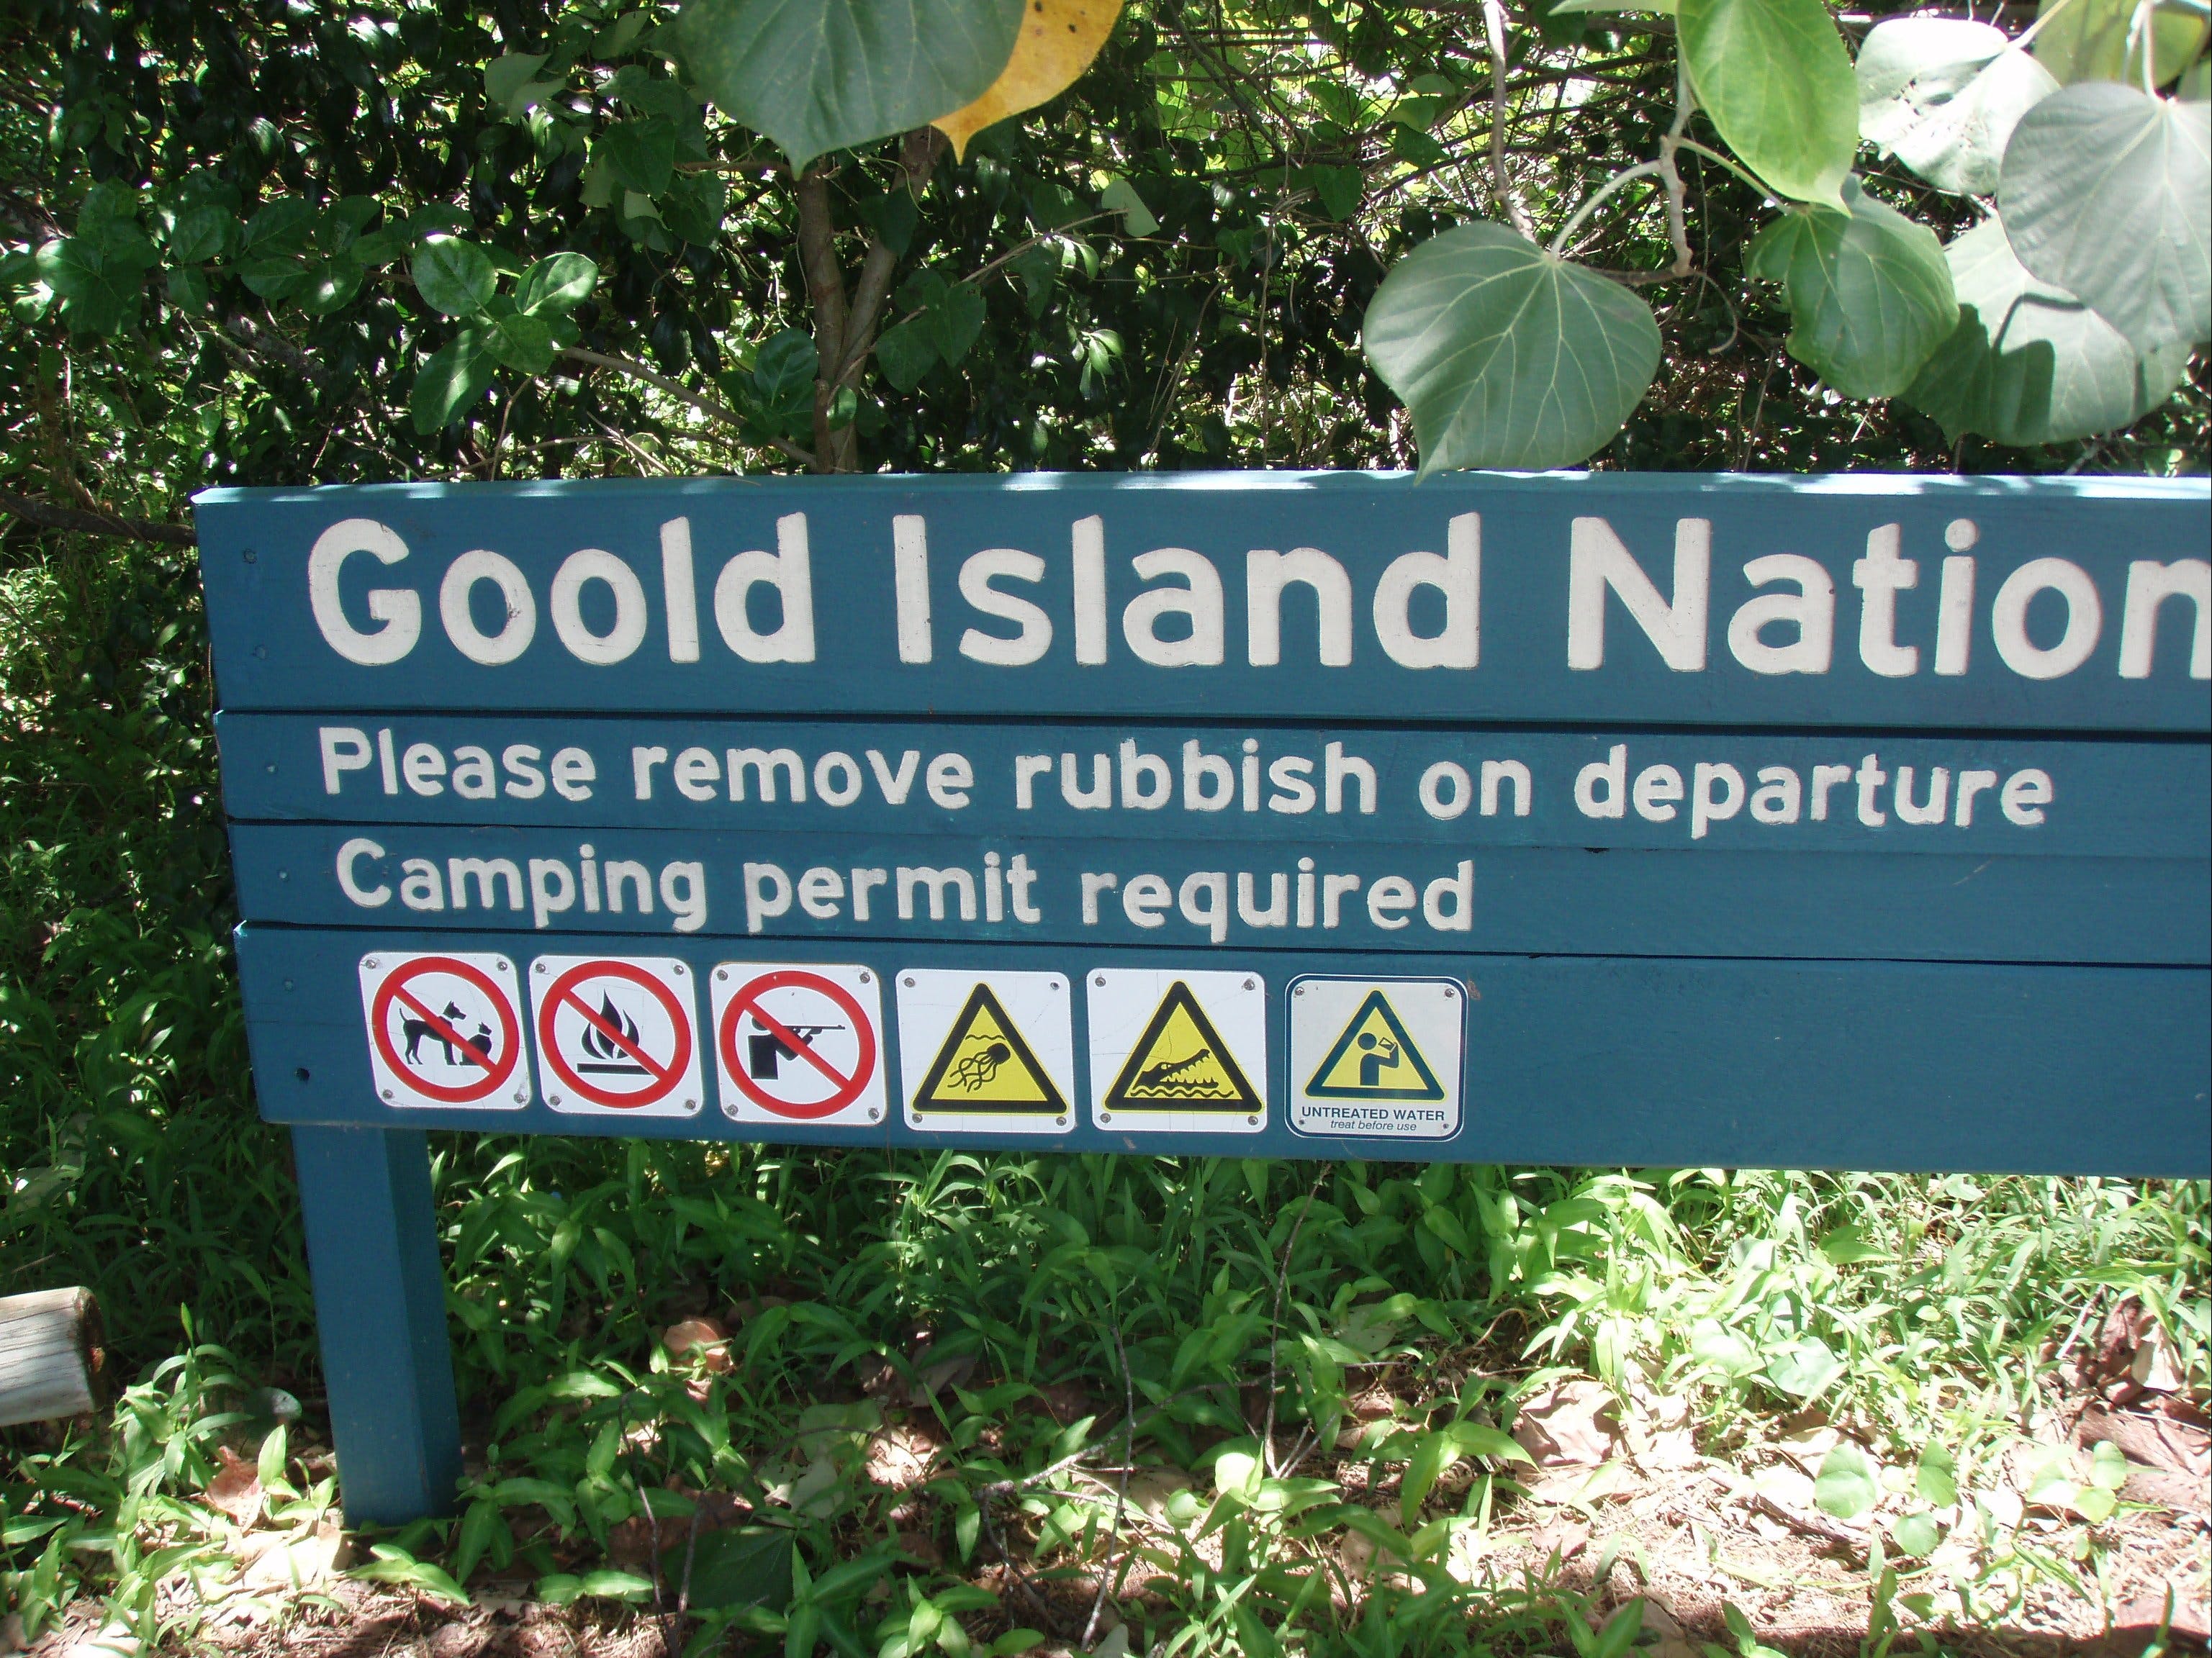 Goold Island National Park - Find Attractions